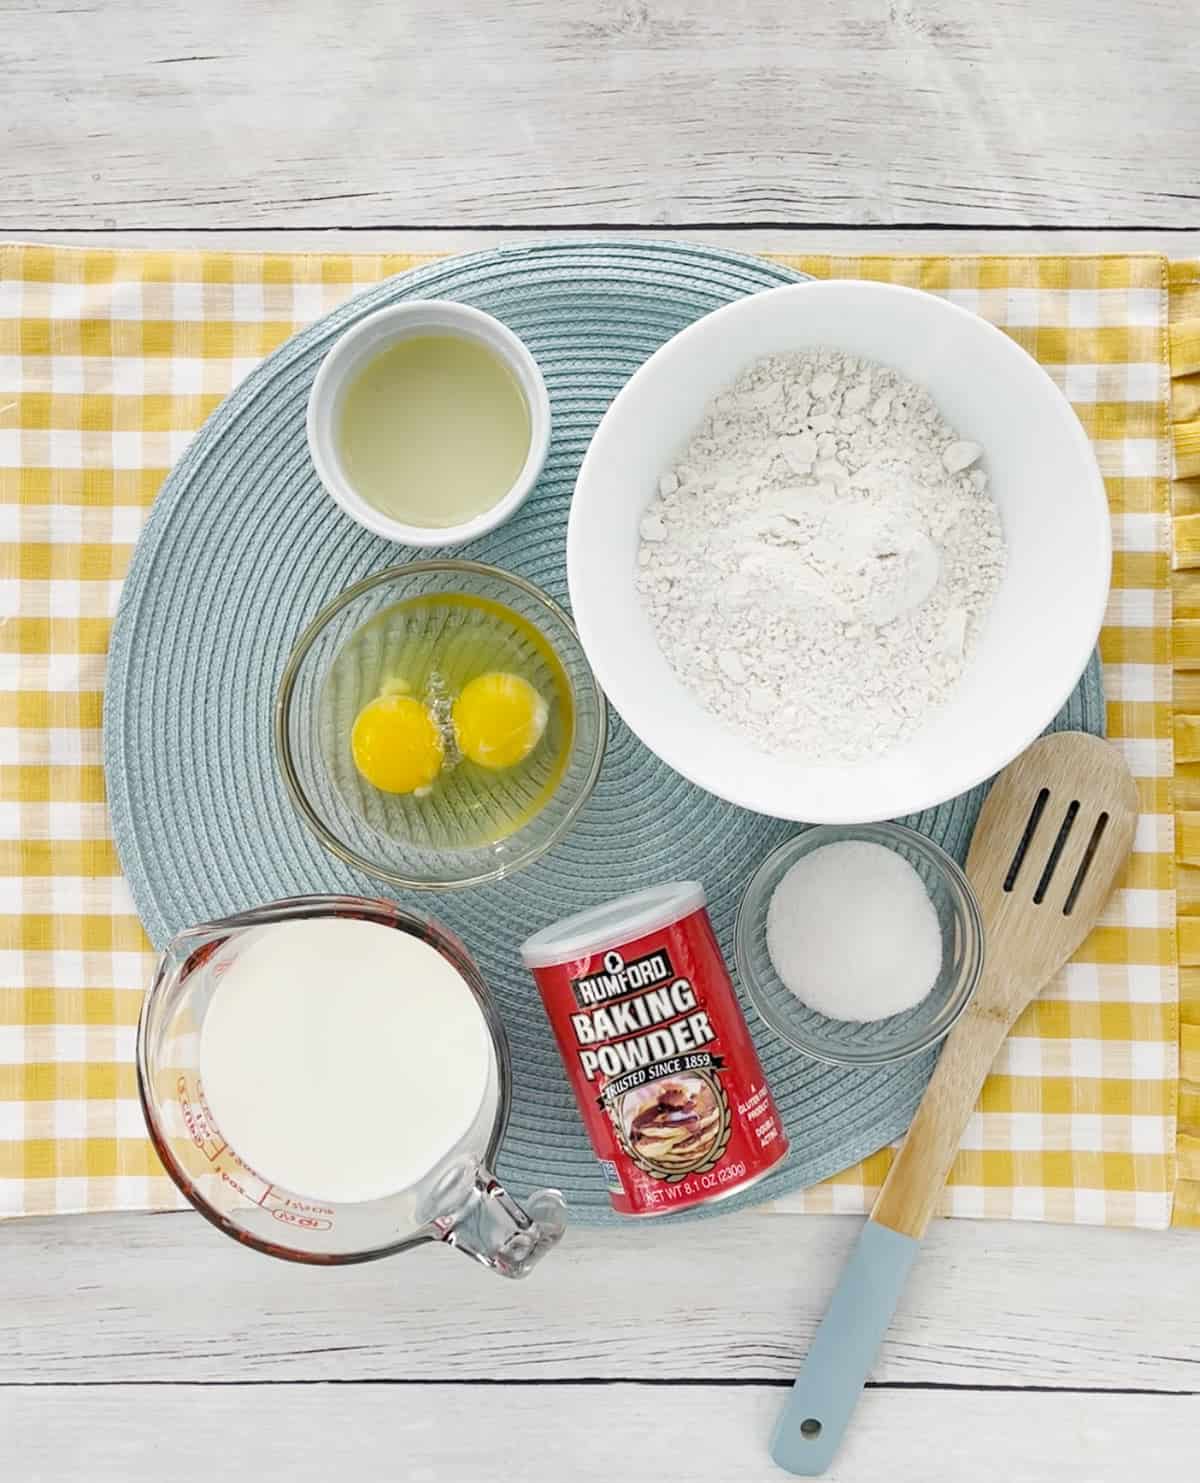 Ingredients for homemade pancakes on a circle placemat.